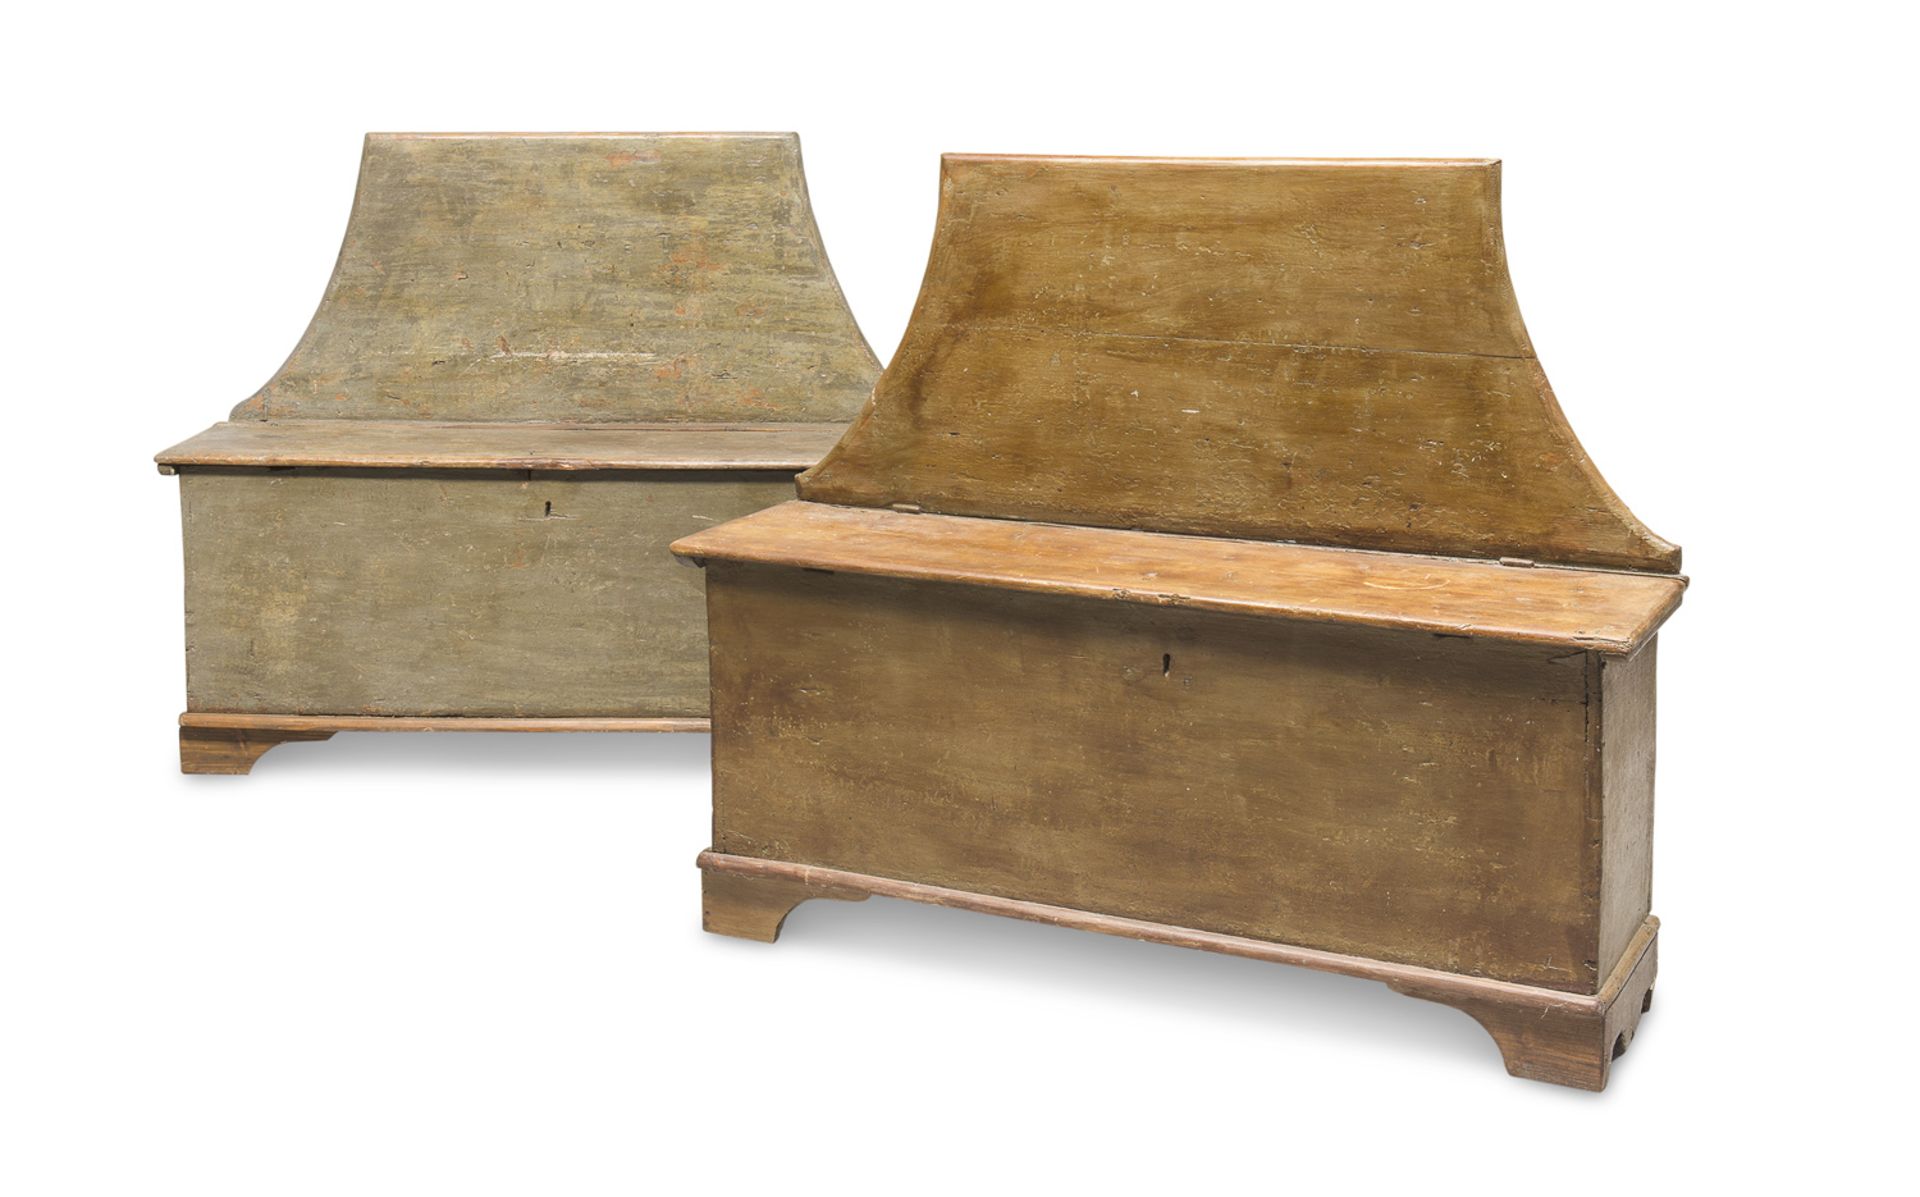 PAIR OF WALNUT ENTRANCE BENCHES 18th CENTURY